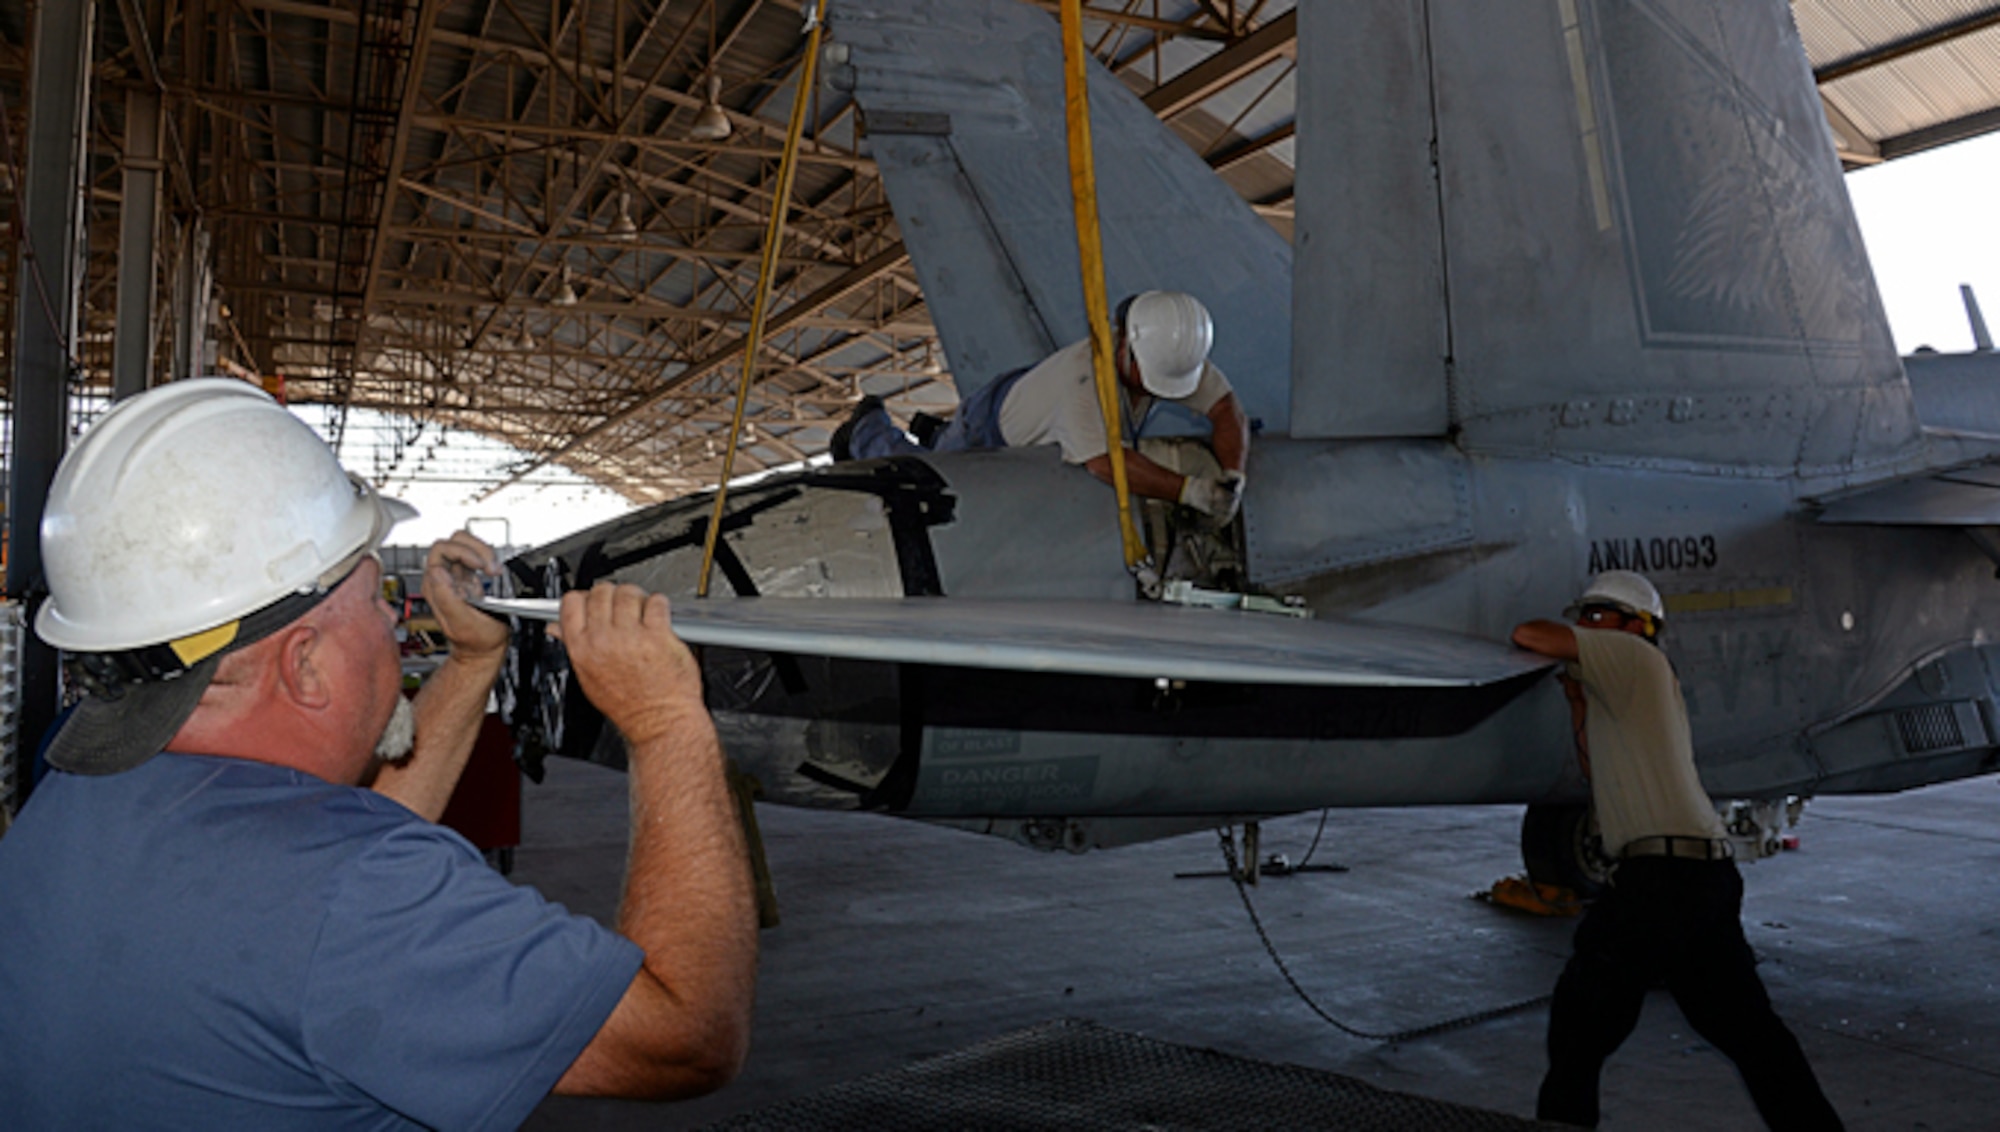 309th Aerospace Maintenance and Regeneration Group mechanics work to remove a stabilator from an F/A-18C Hornet at Davis-Monthan AFB, Ariz., on June 6, 2016, in preparation for the aircraft to be transported to a Boeing maintenance facility at Cecil Airport in Jacksonville, Fla.